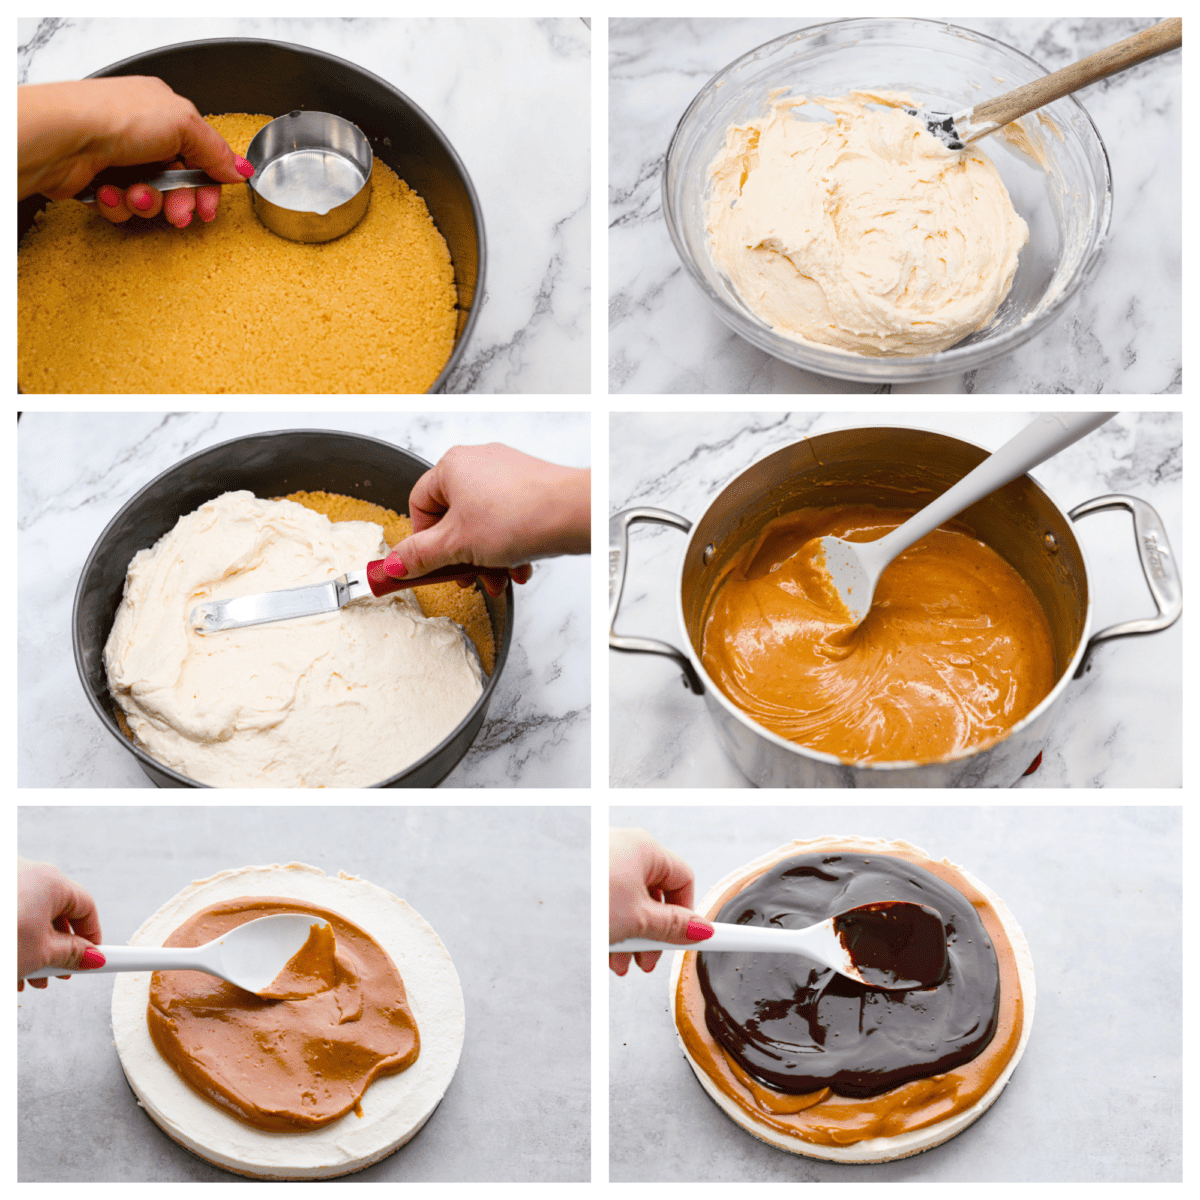 4-photo collage of the cheesecake, caramel, and chocolate ganache layers  being added to a springform pan.